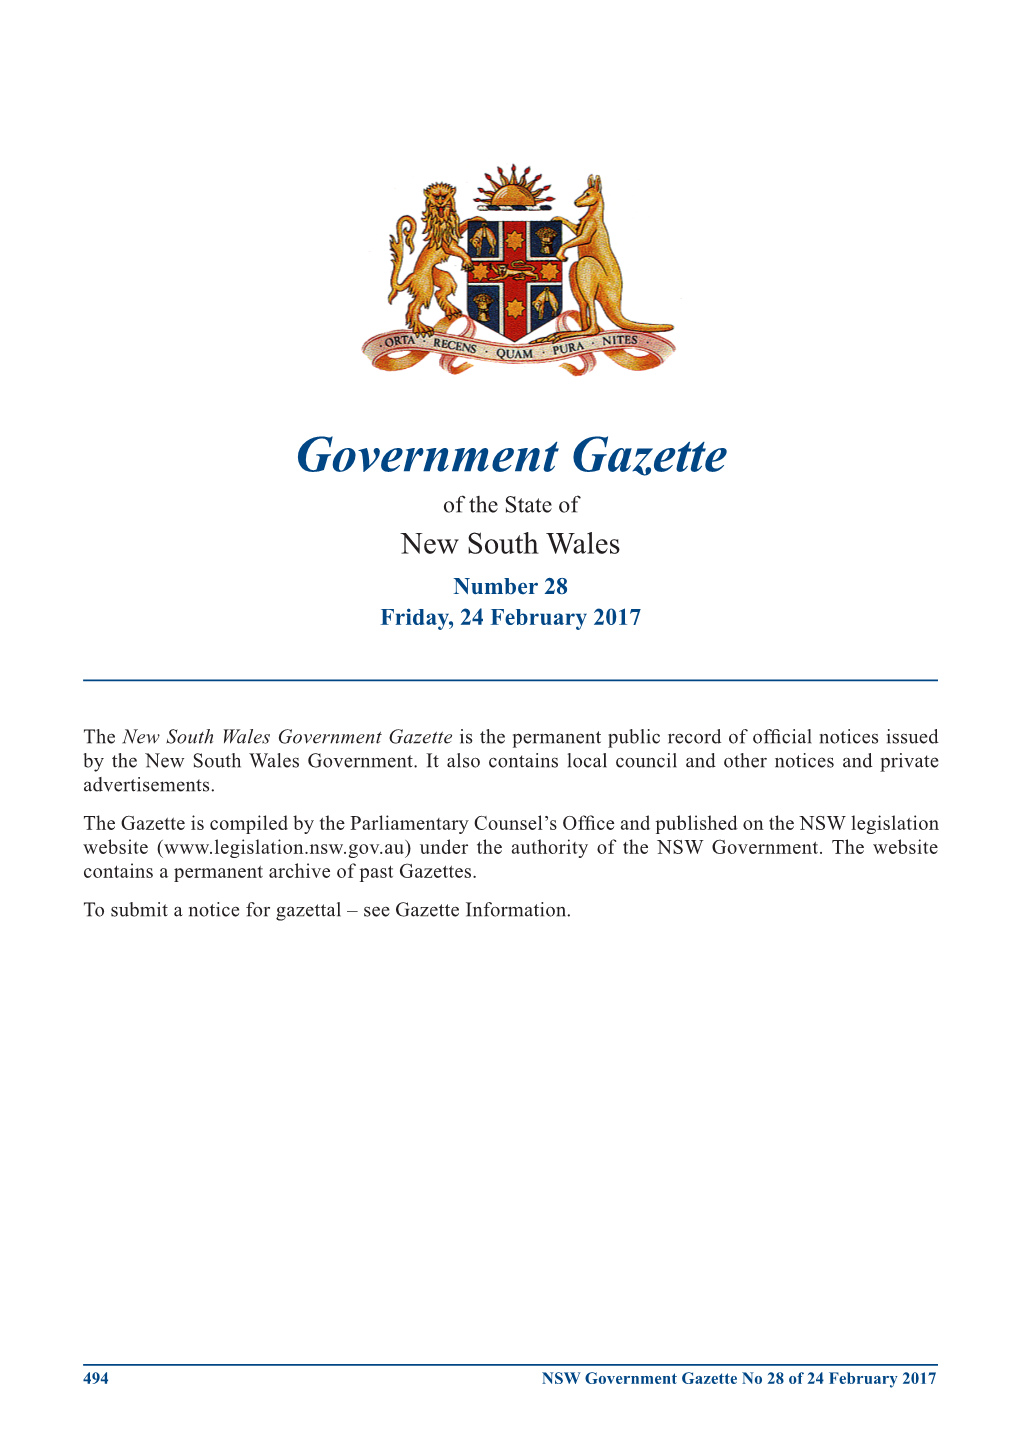 Government Gazette of the State of New South Wales Number 28 Friday, 24 February 2017